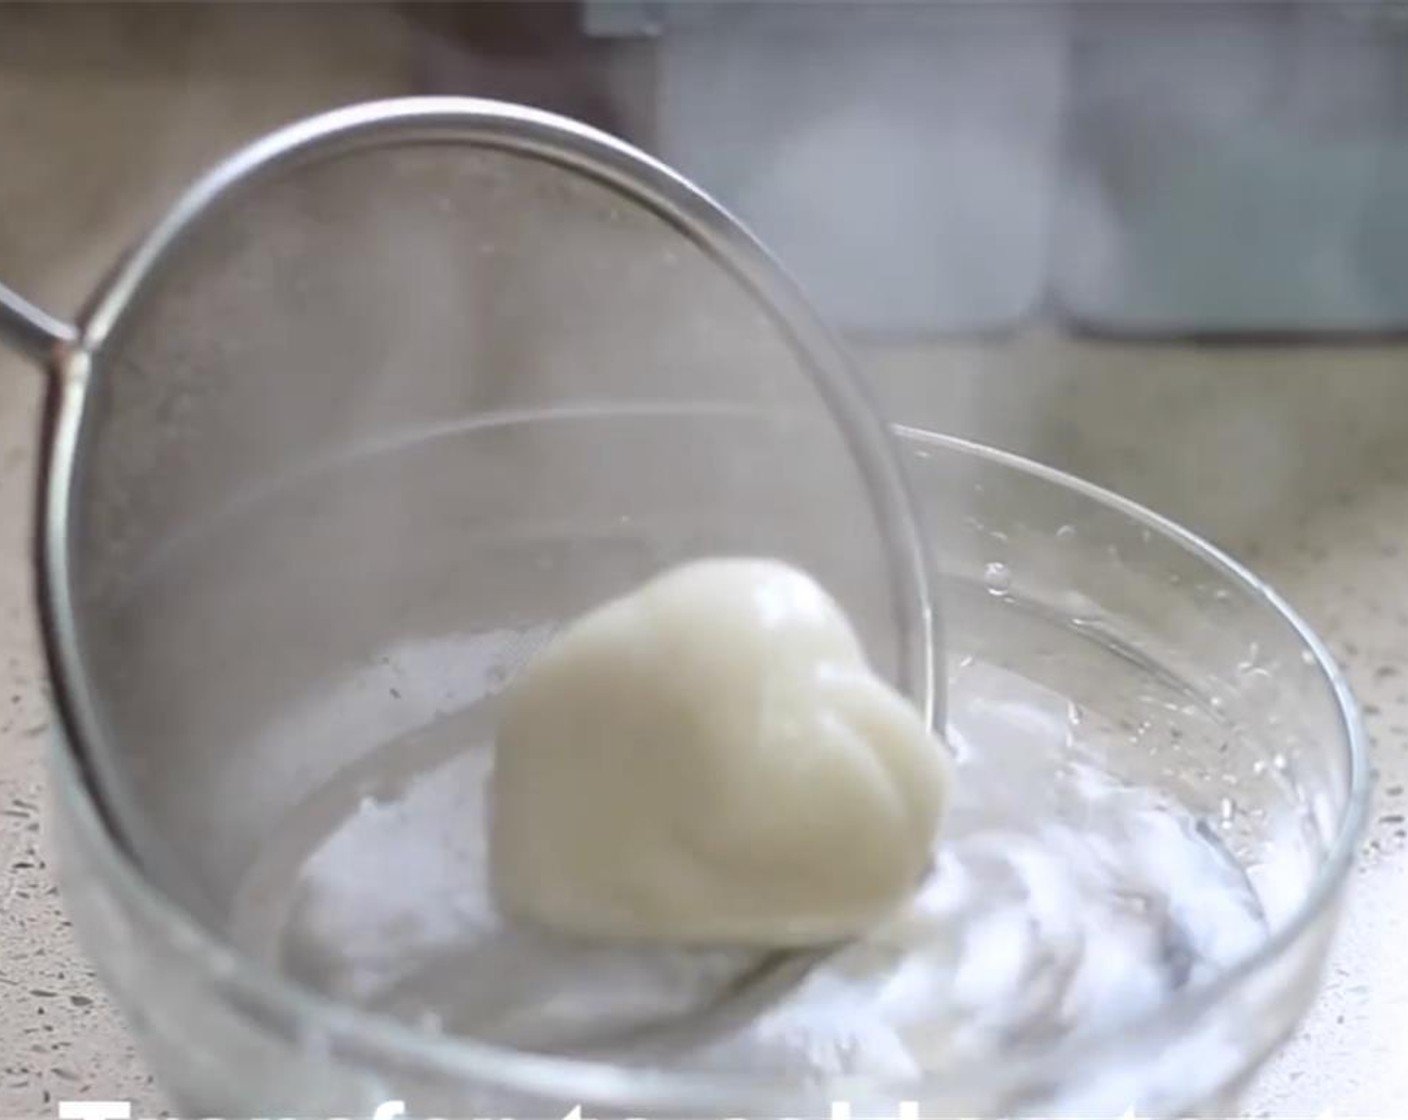 step 2 Bring some water to boil and then cook the small dough for around 2-3 minutes. Prepare a bowl with cold water on the side. When the small dough is cooked, transfer it out with soak with cold water to cool down.